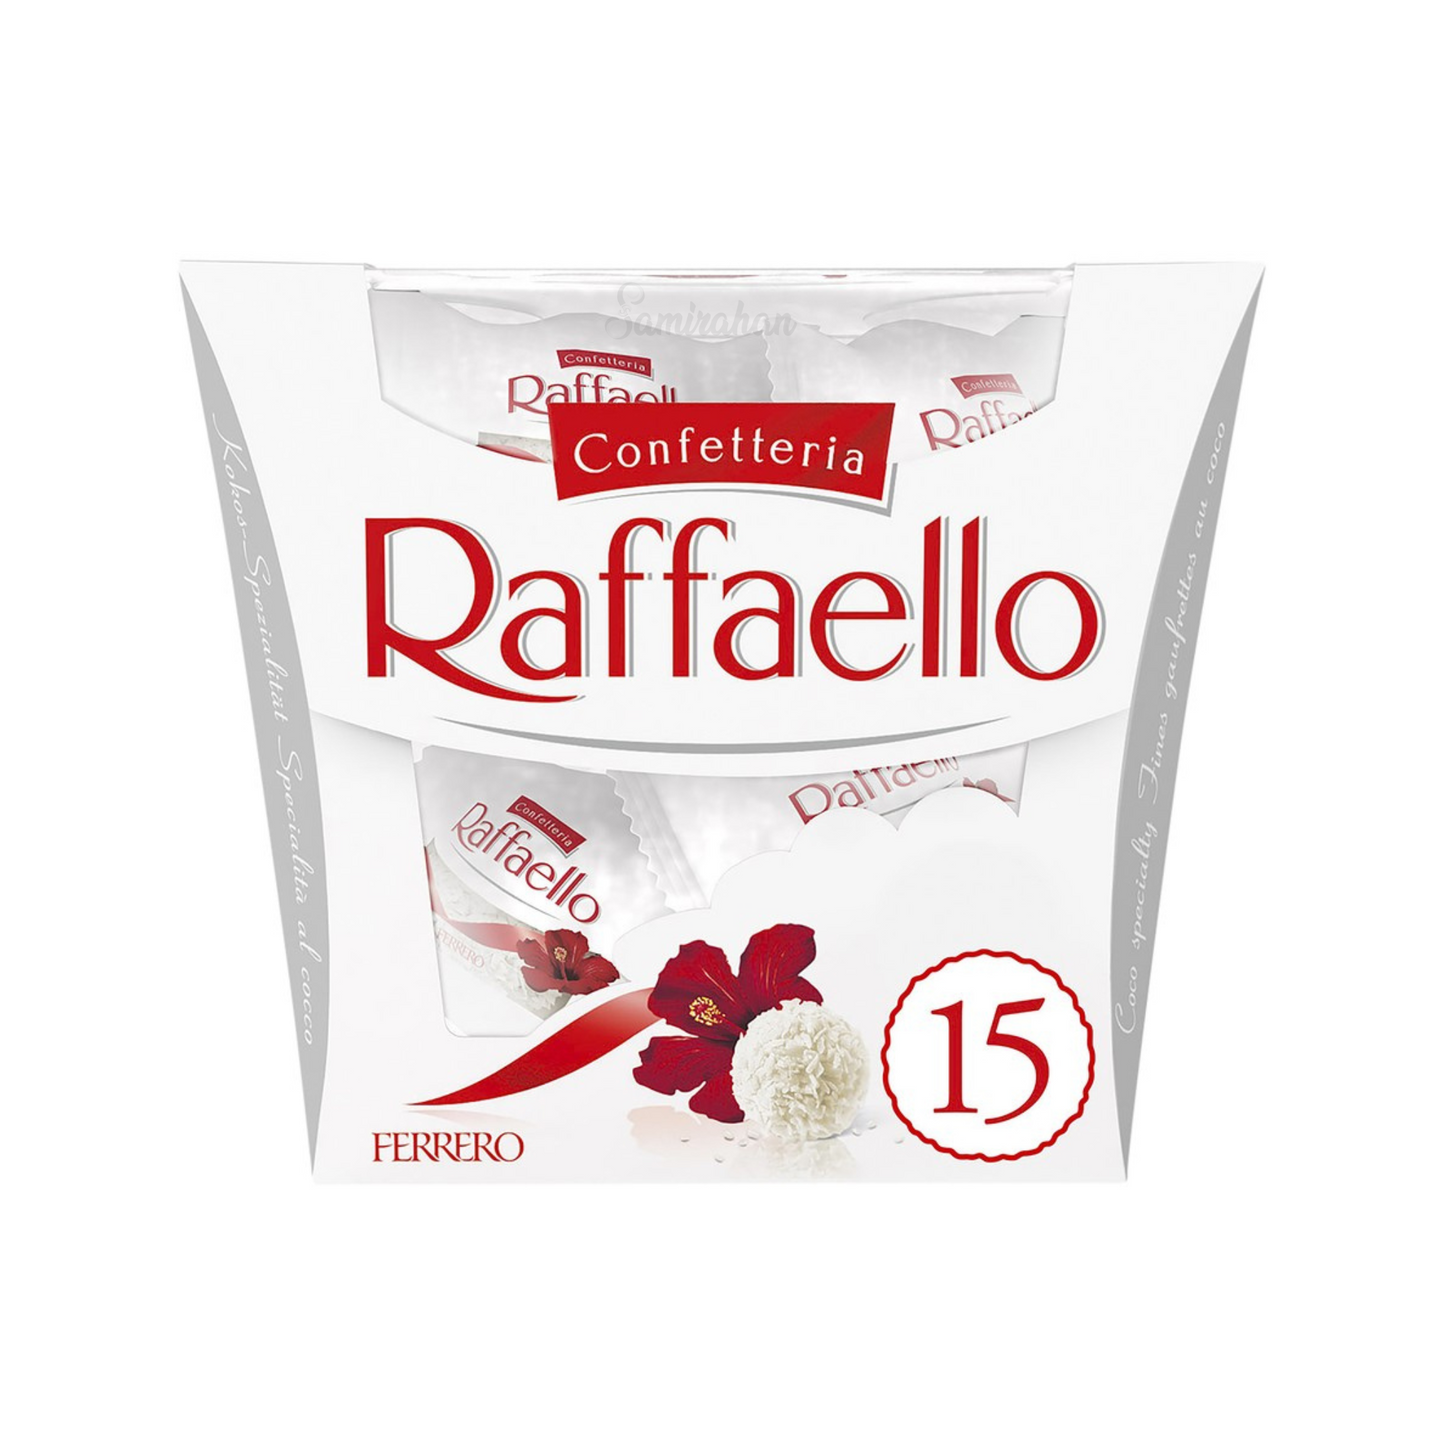 Raffaello Coconut And Almond is a precious heart of white almond enveloped in a delicious creamy filling, all enclosed in a crispy wafer shell scattered with fragrant coconut flakes. Best imported foreign Australian Aussie genuine authentic premium sweets gift idea candy real snack cheap price in Dhaka Bangladesh.